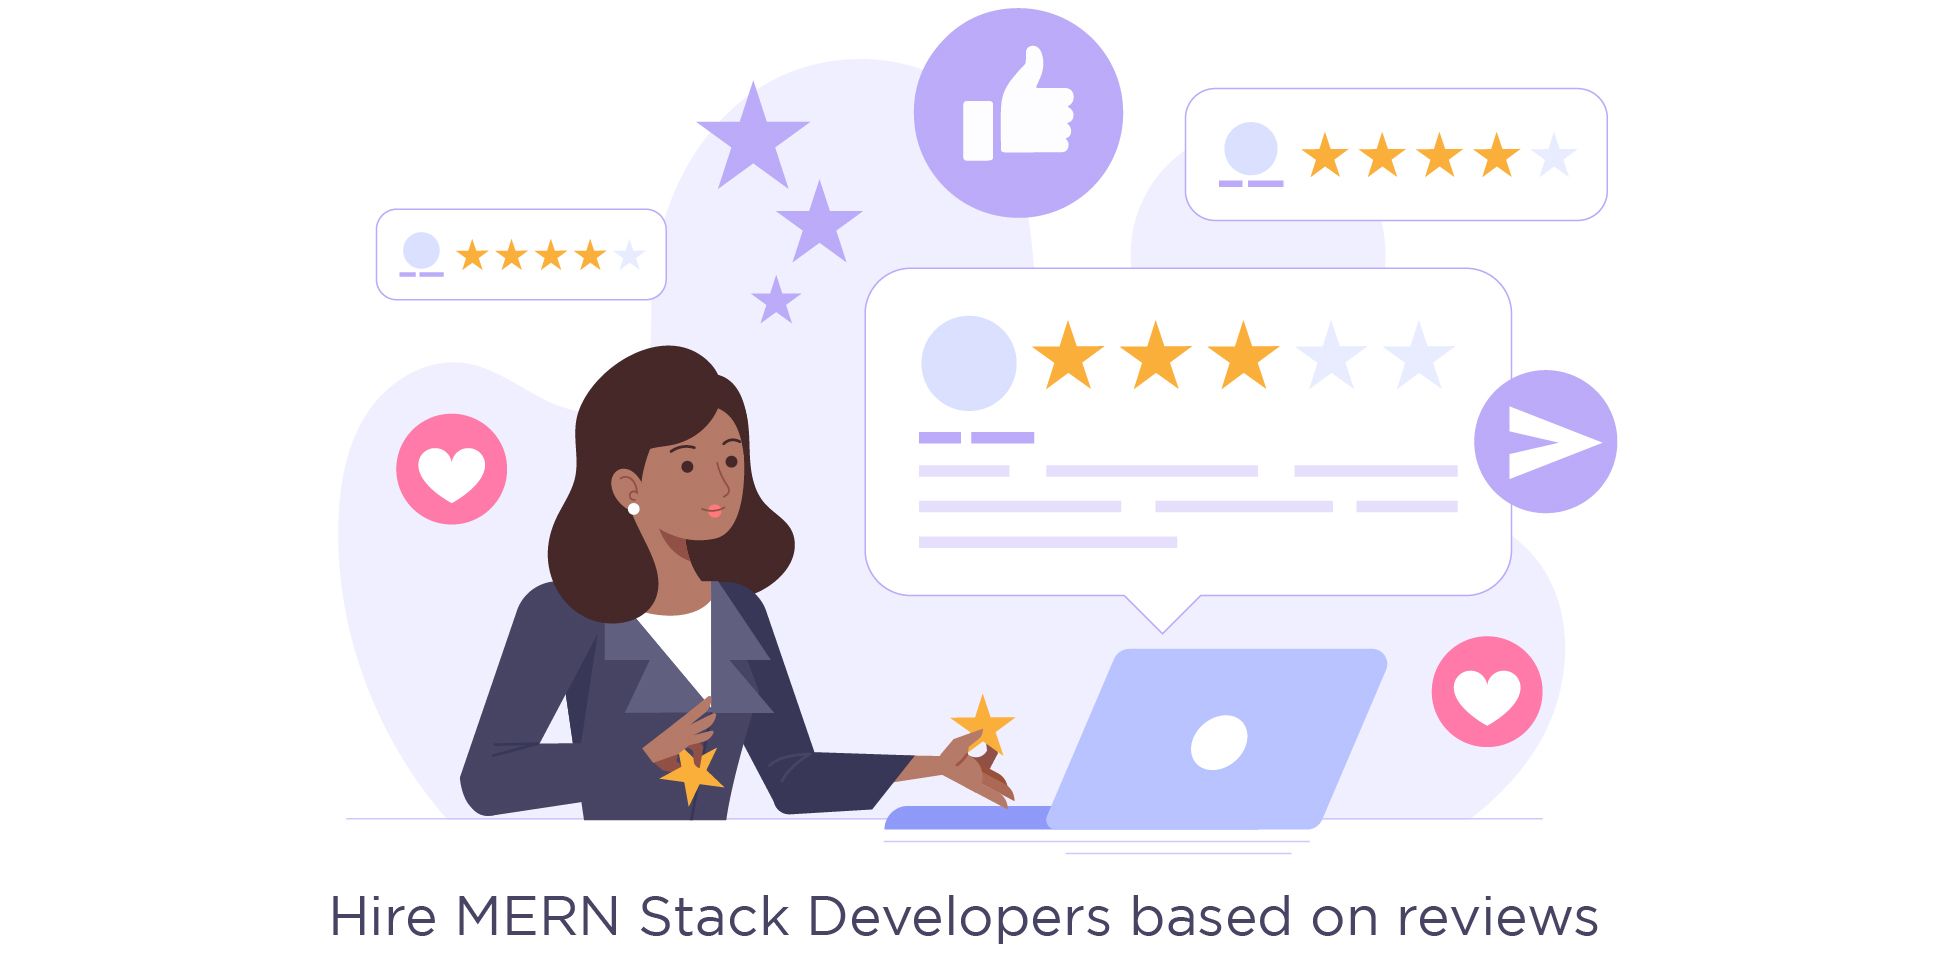 Hiring MERN Stack Developers to hire companies based on reviews